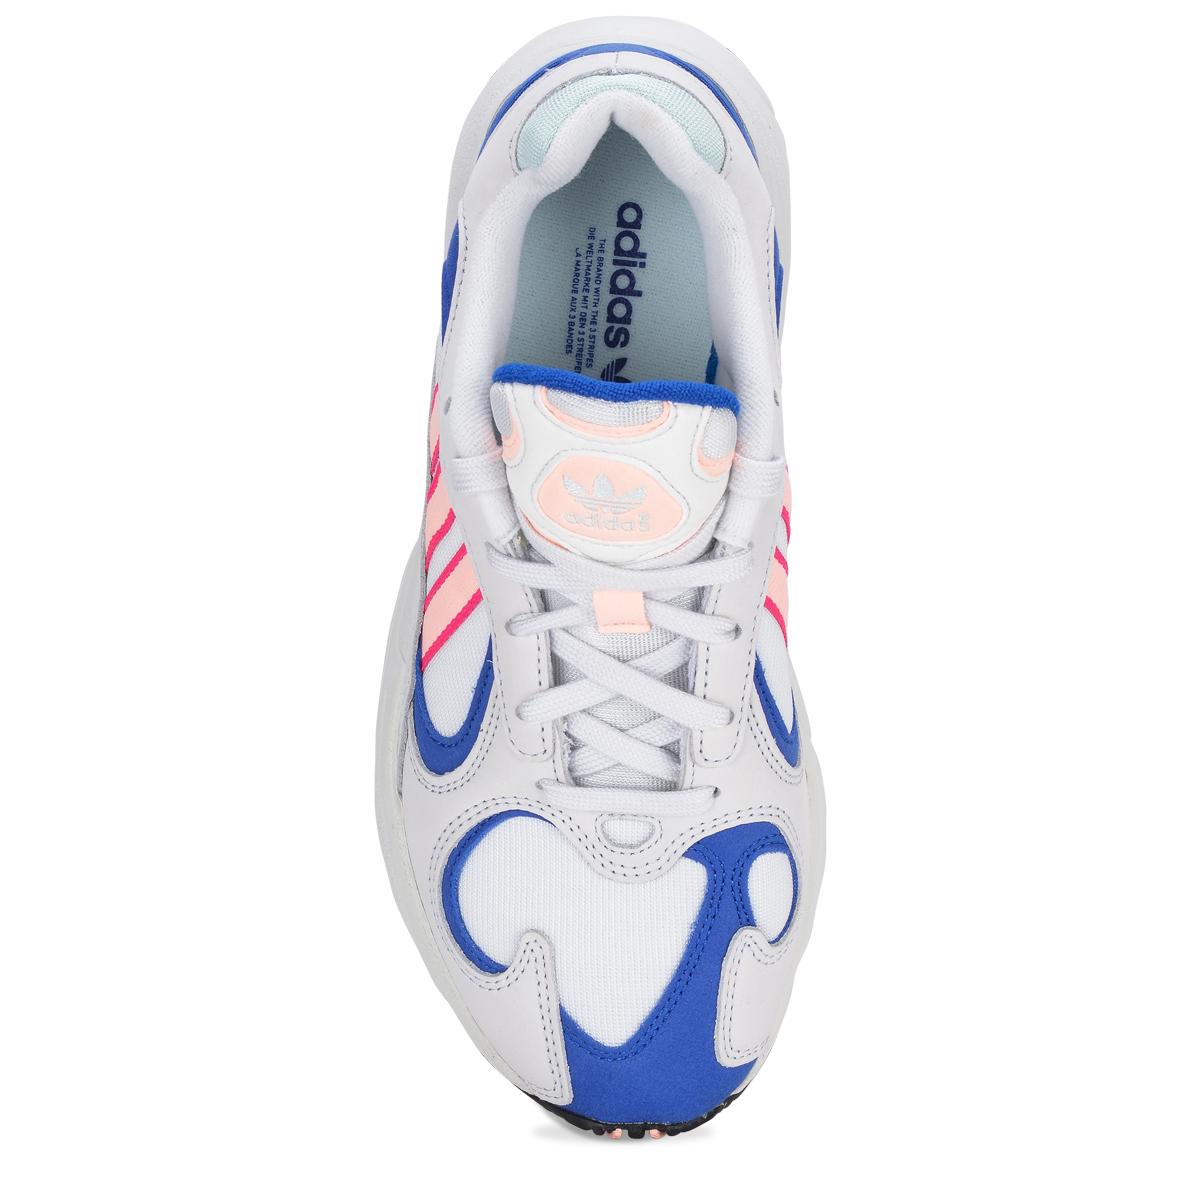 adidas Originals Suede Yung-1 Sneaker in Crystal White (White) - Save 75% -  Lyst